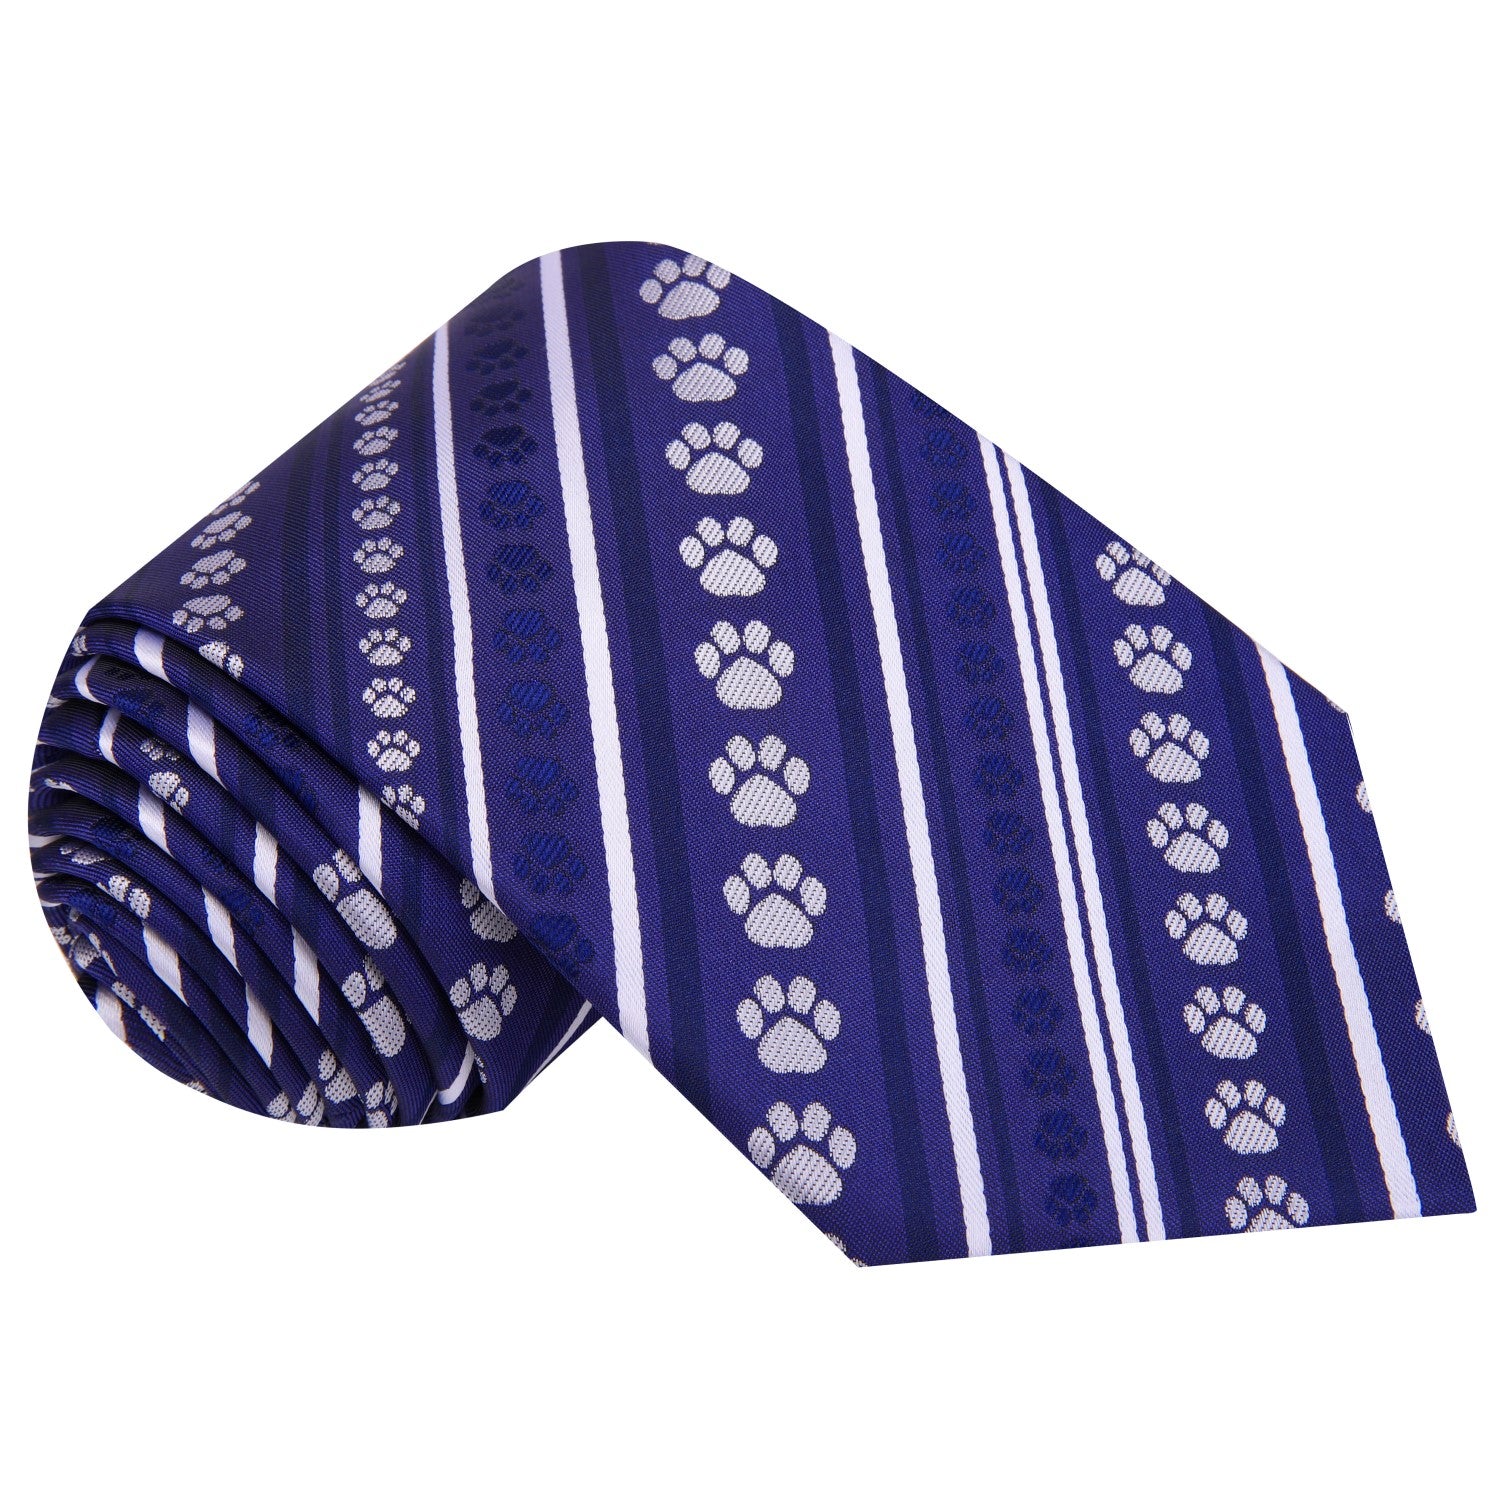 Blue and Grey Paw Prints Tie